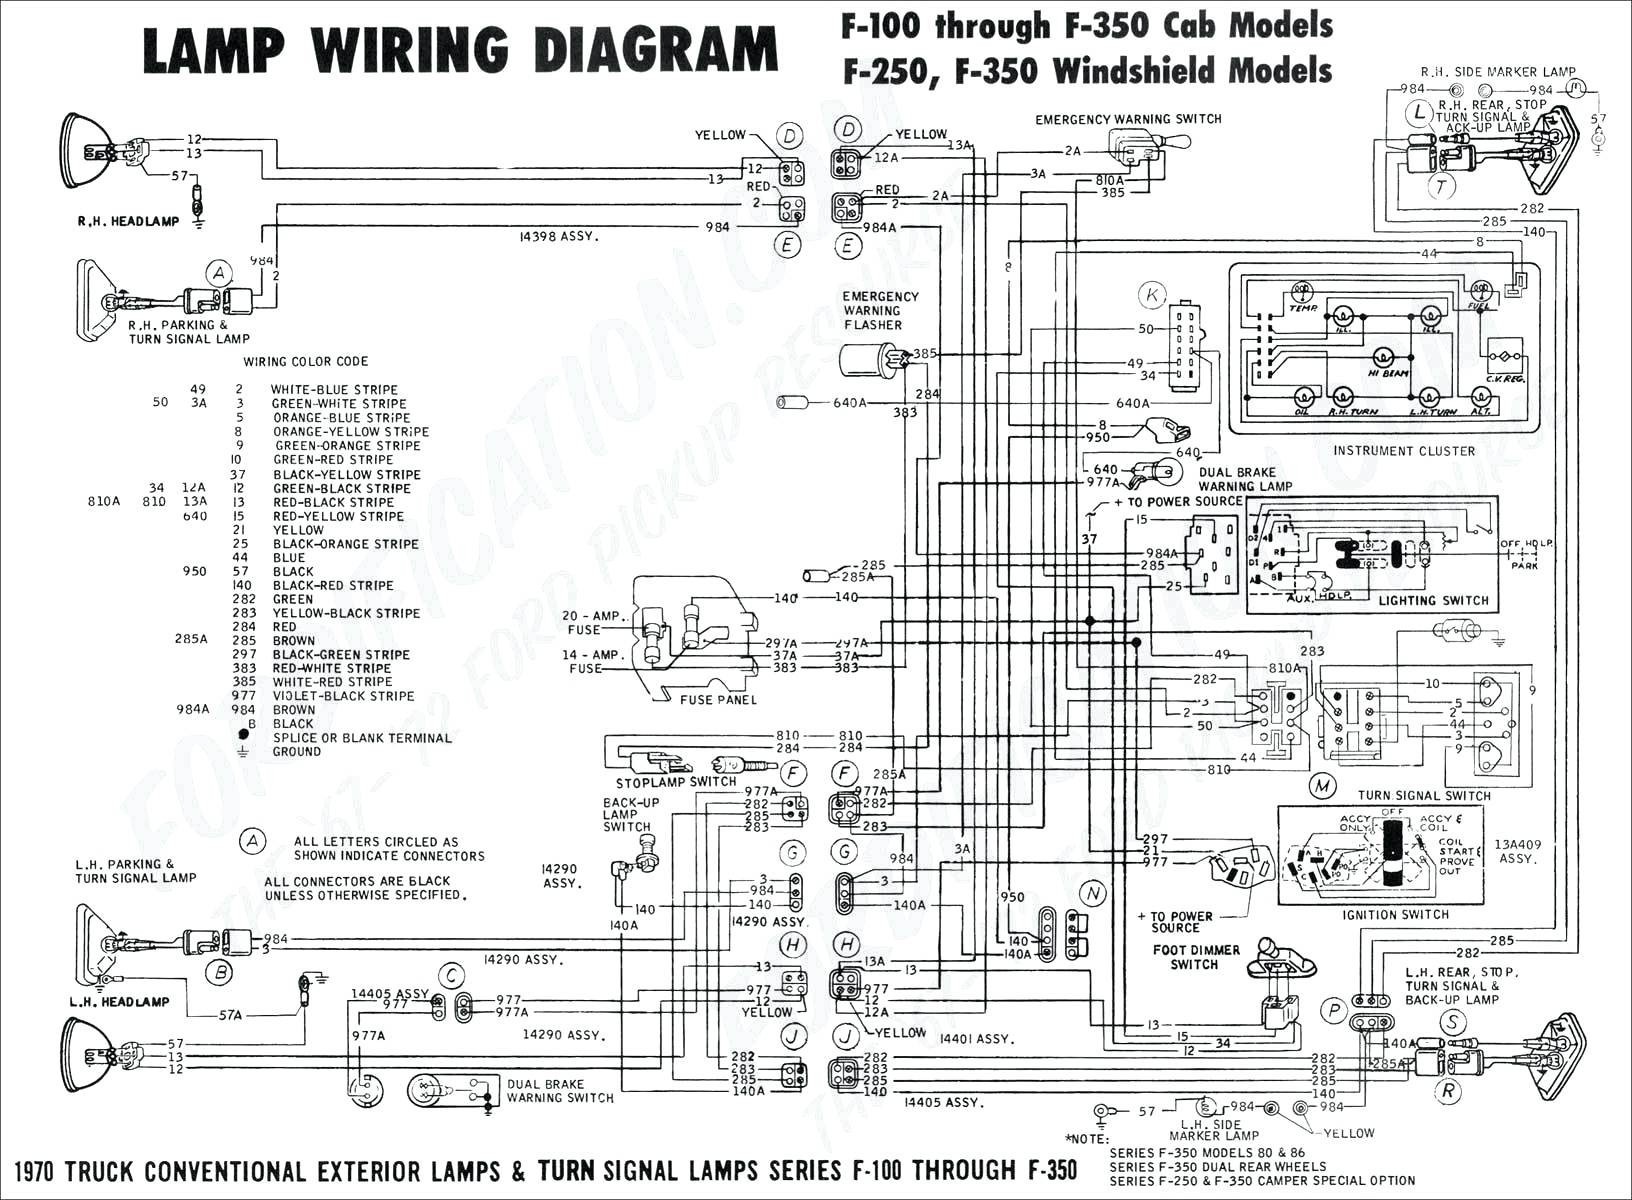 1999 Chevy Silverado Trailer Wiring Diagram Car 5 1500 Injector Within 5b01be889d448